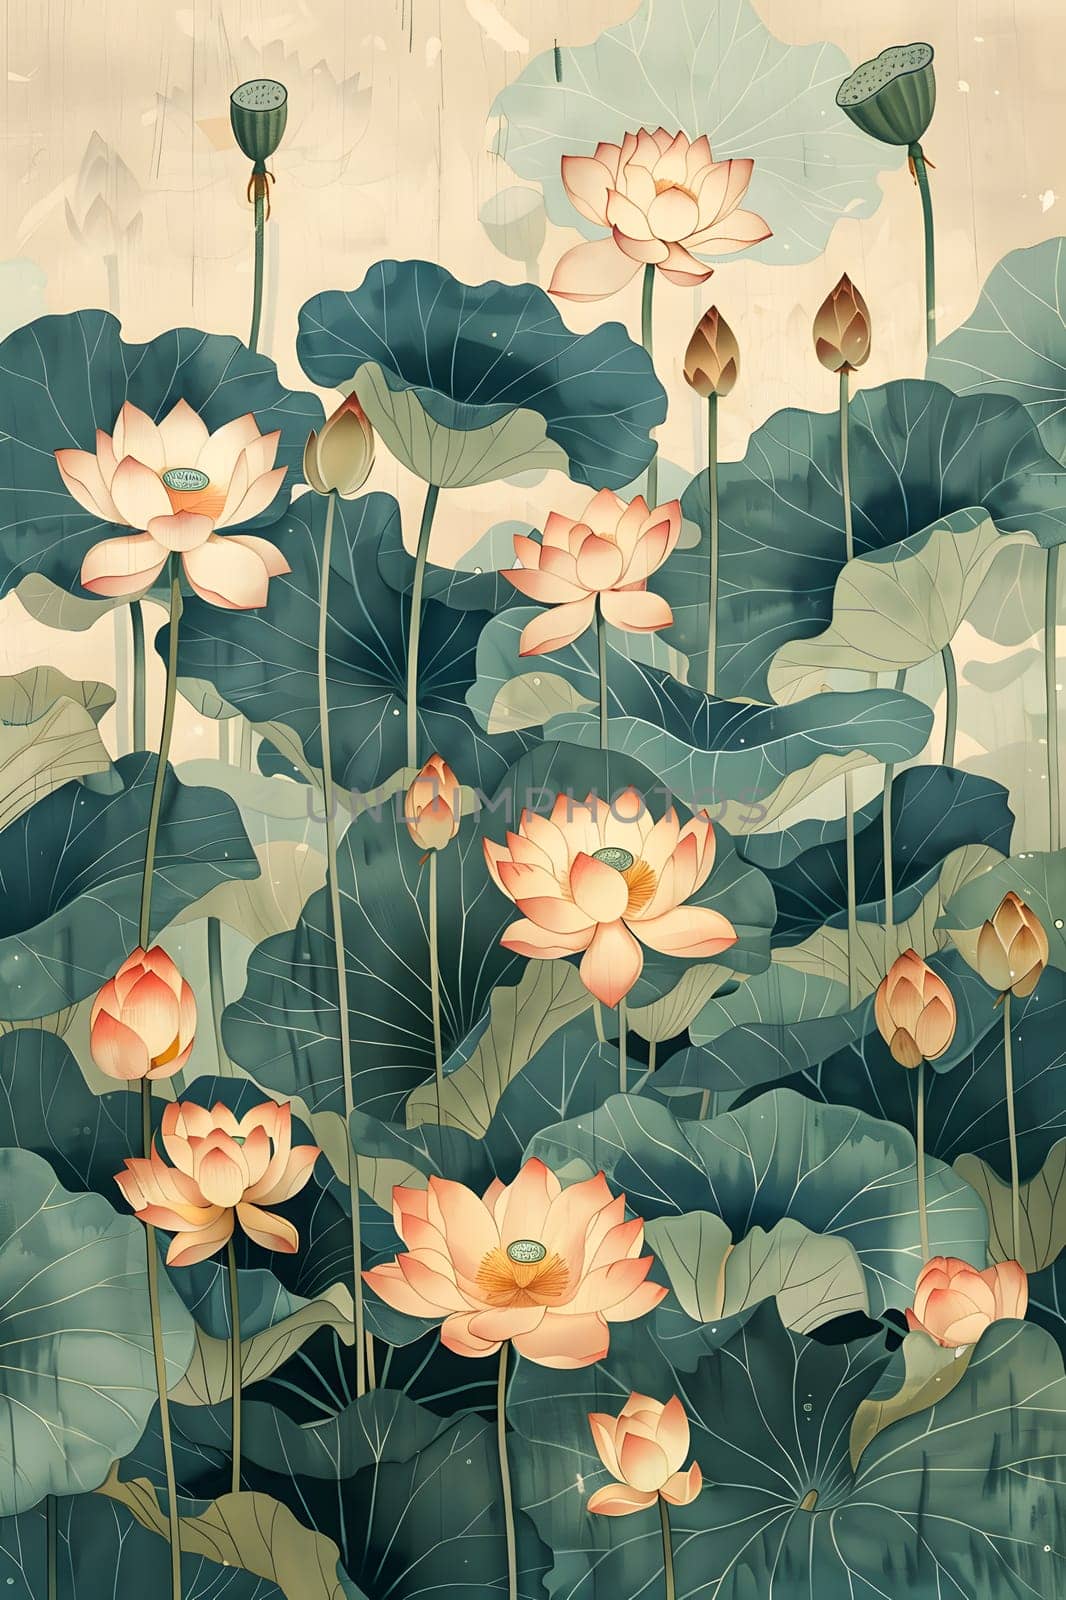 Art depicting sacred lotus flowers and leaves in a pond by Nadtochiy